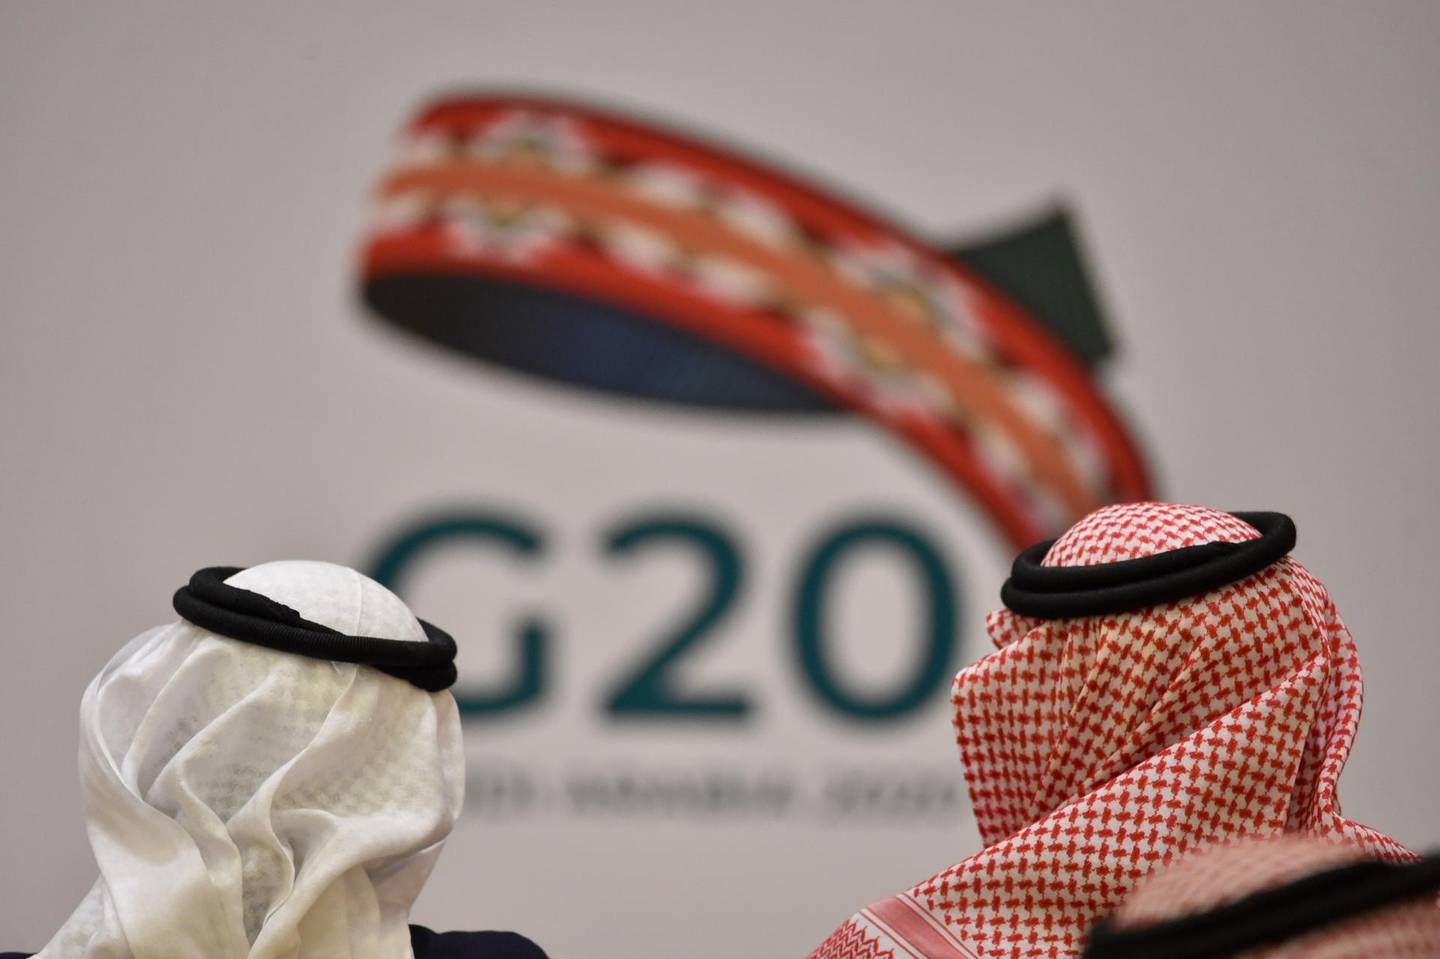 Unidentified guests attend a meeting of Finance ministers and central bank governors of the G20 nations in the Saudi capital Riyadh on February 23, 2020. The deadly coronavirus epidemic will dent global growth, the IMF warned, as G20 finance ministers and central bank governors weighed its economic ripple effects at a two-day gathering in Riyadh. / AFP / FAYEZ NURELDINE
